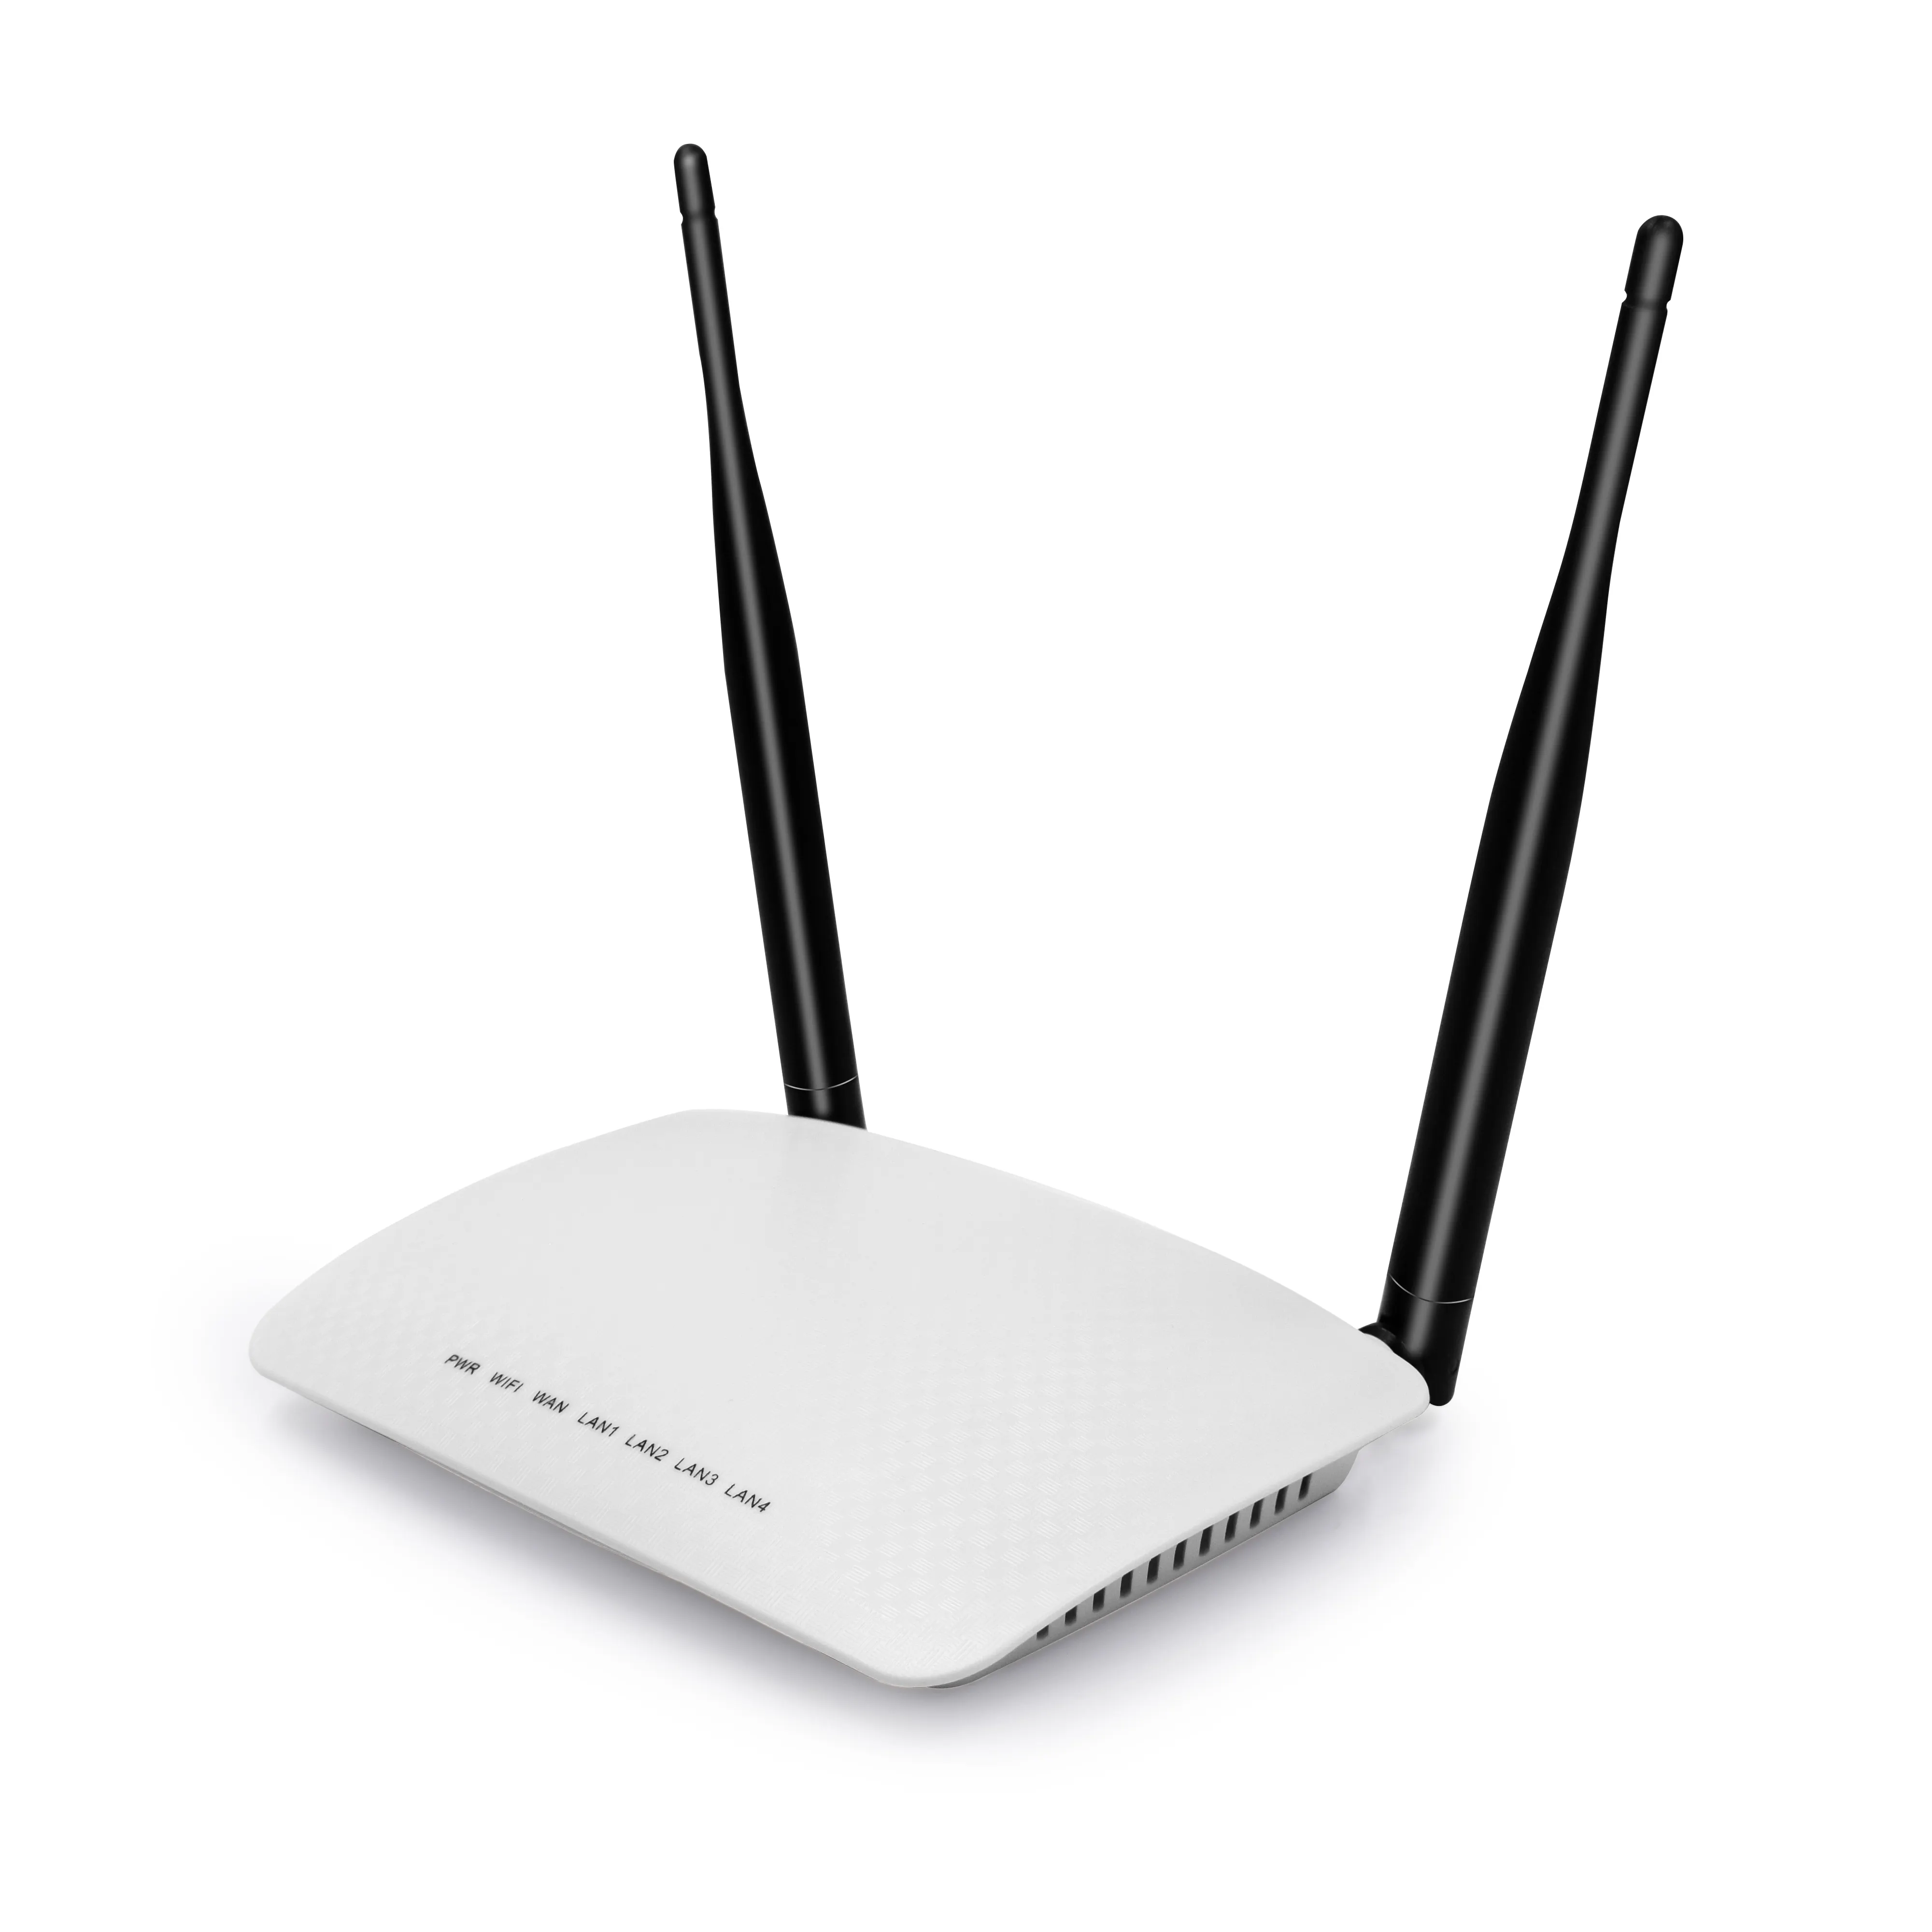 OEM/ODM <span class=keywords><strong>Router</strong></span> Không Dây 300Mbps Wifi <span class=keywords><strong>Router</strong></span> MTK7628N Chipset Với 2x5dBi Omni <span class=keywords><strong>Hướng</strong></span>